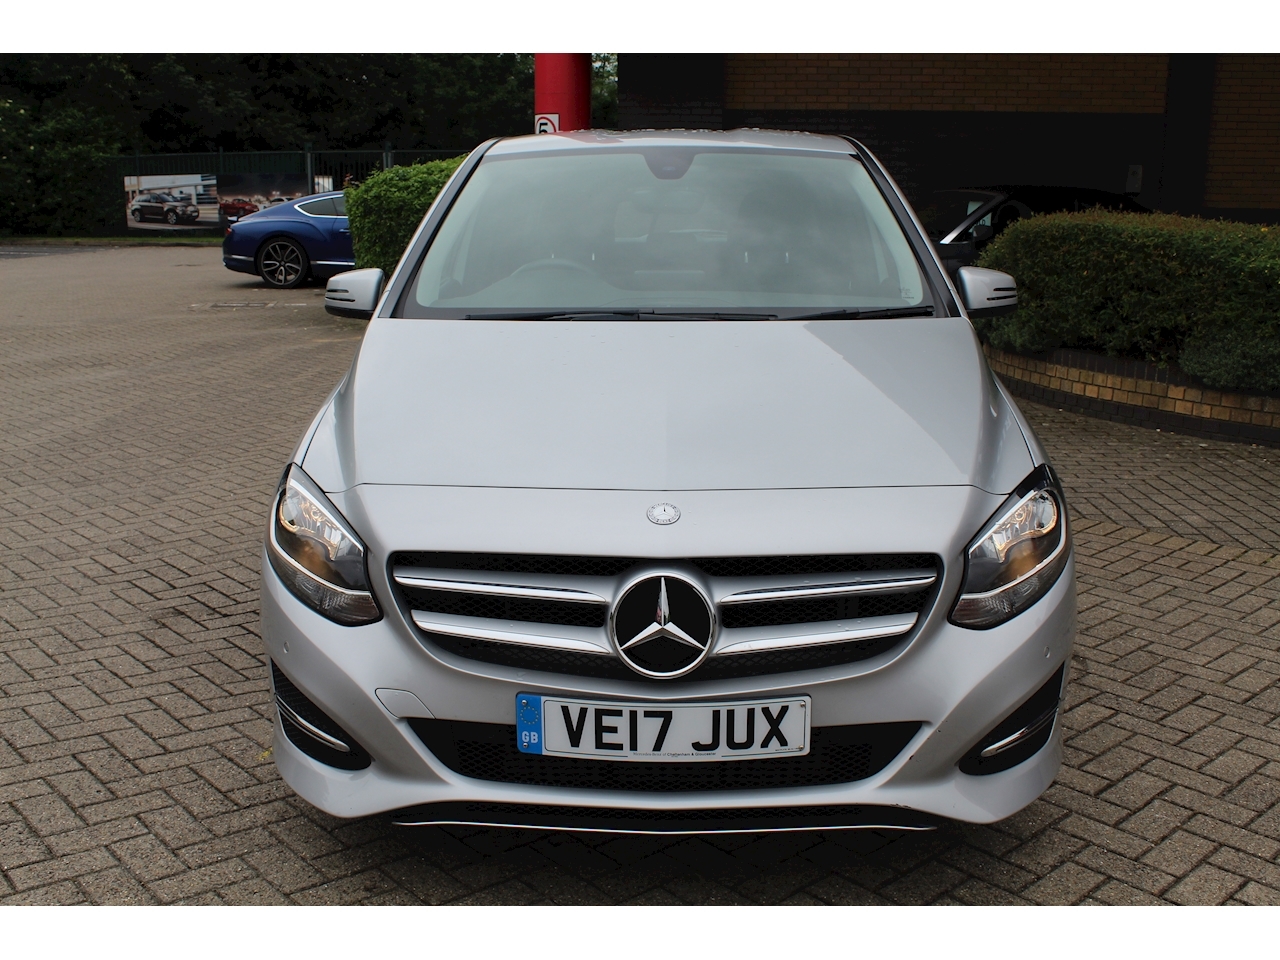 2.1 B200d Sport (Executive) MPV 5dr Diesel 7G-DCT (s/s) (136 ps)